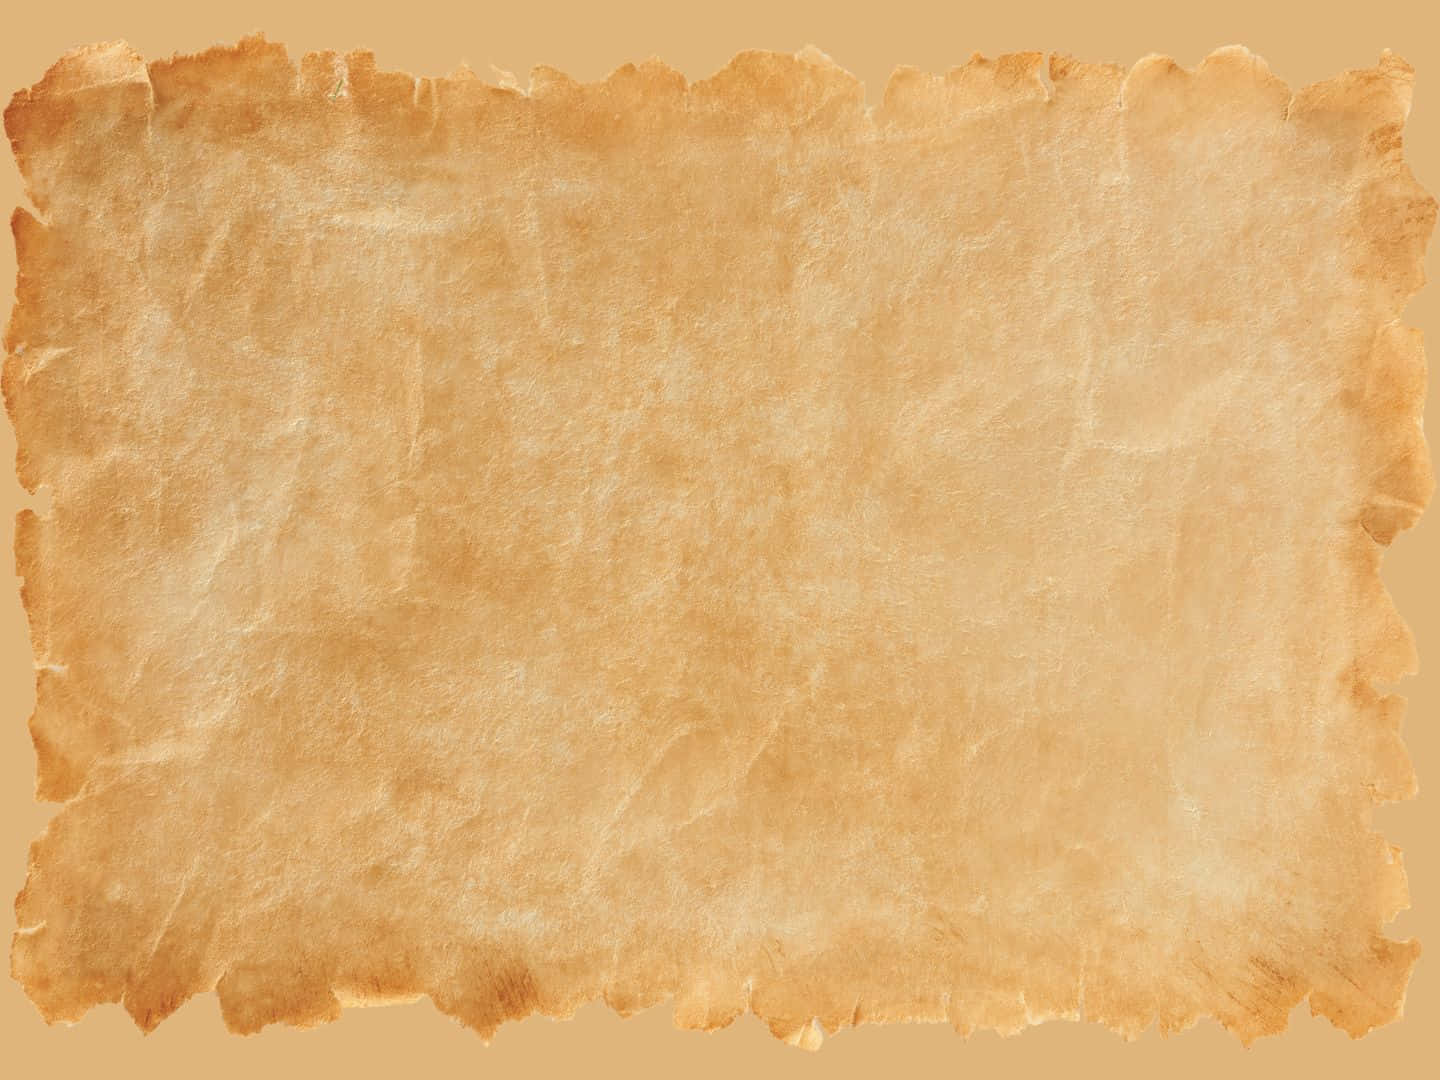 Parchment Background With Badly Ripped Edges